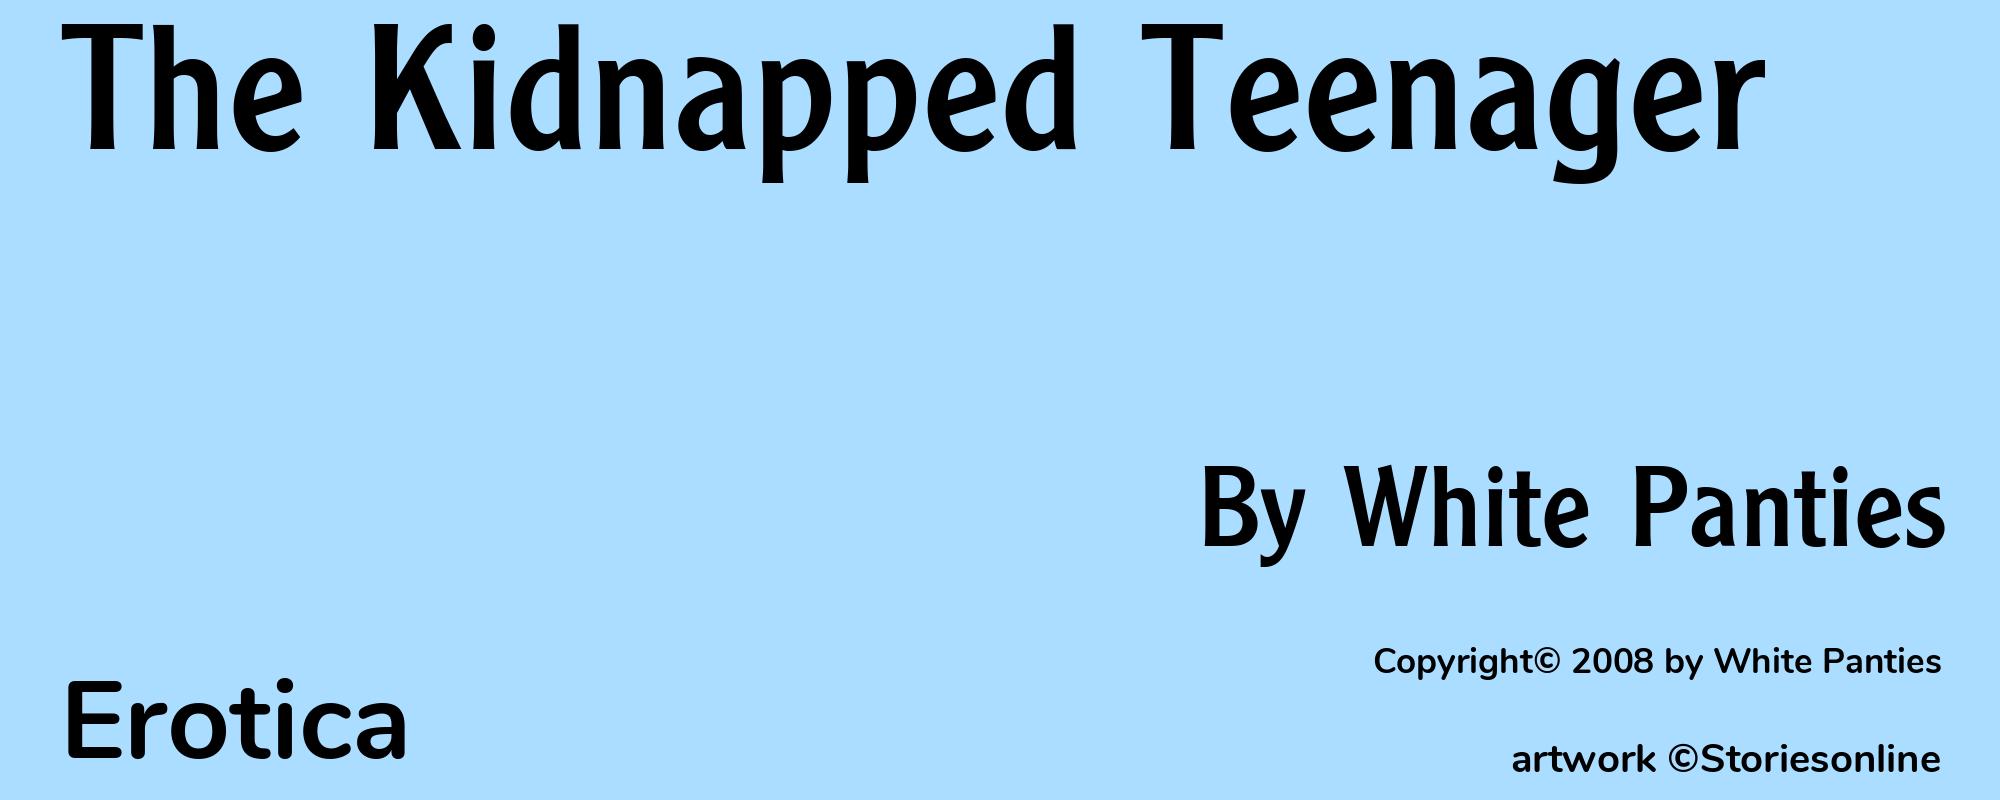 The Kidnapped Teenager - Cover